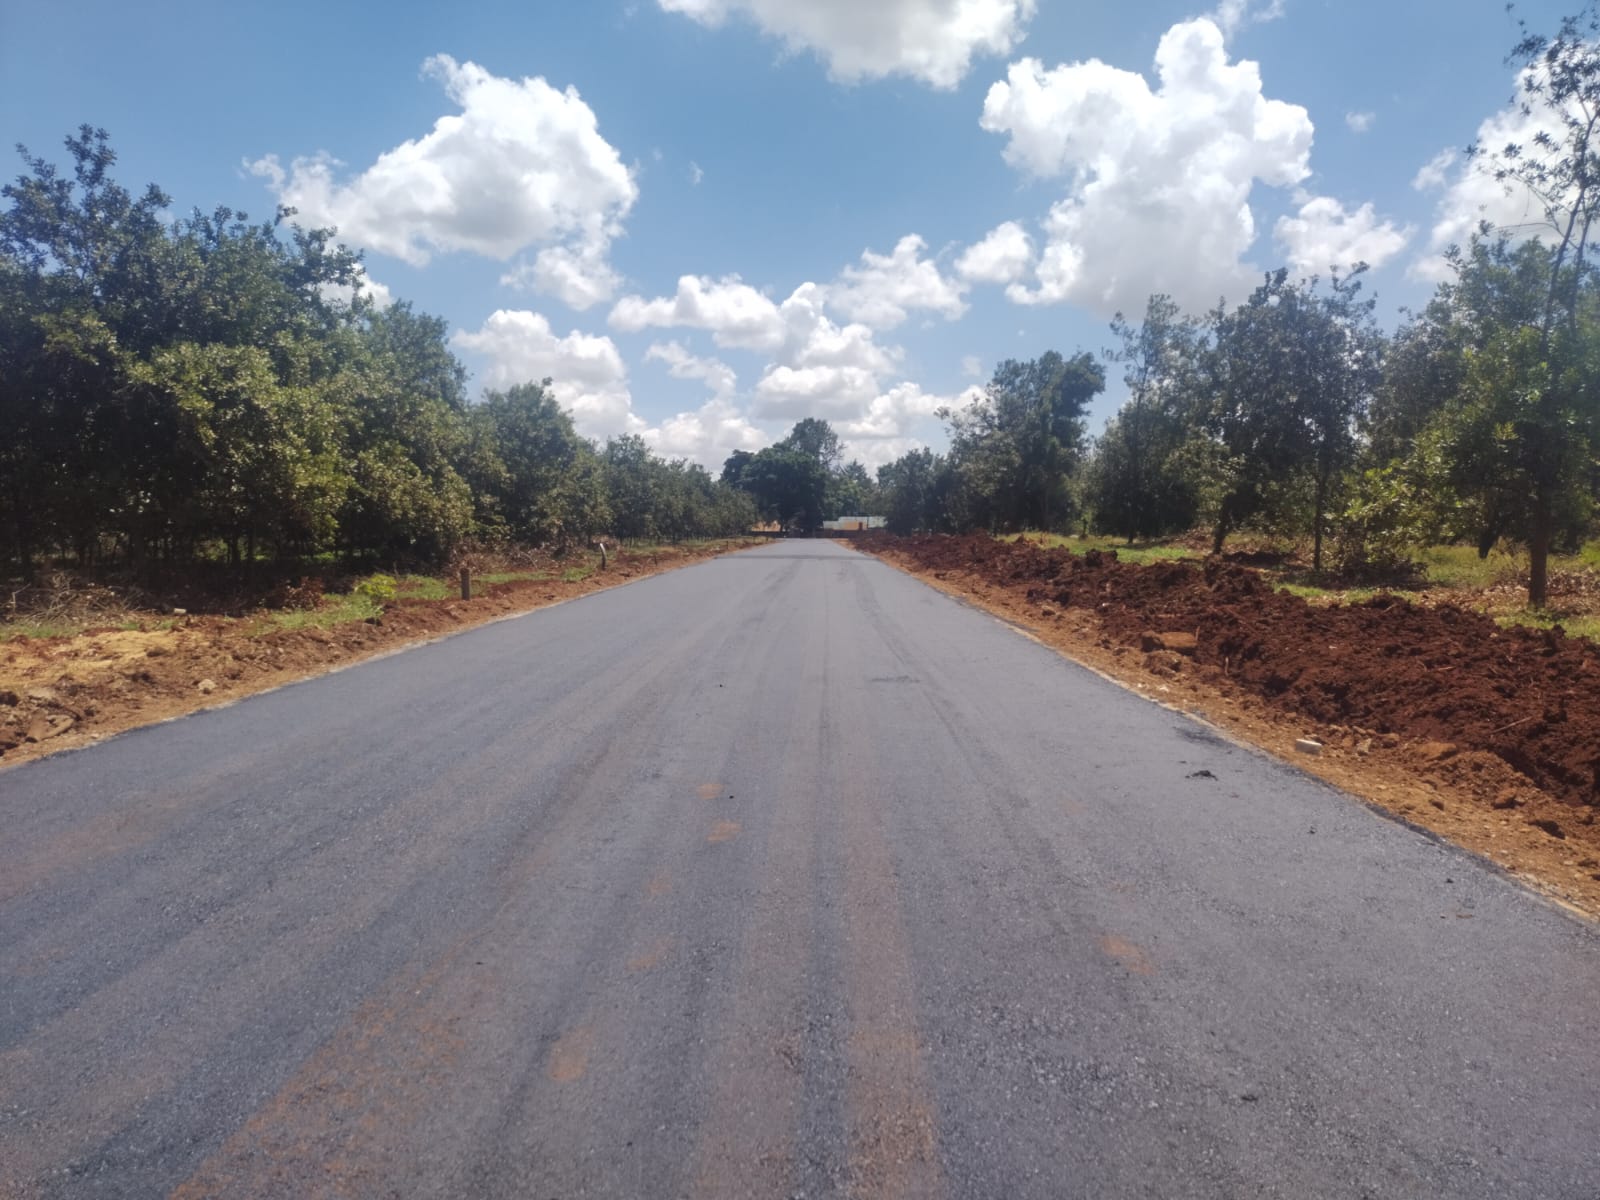 Thika Grove plots for sale